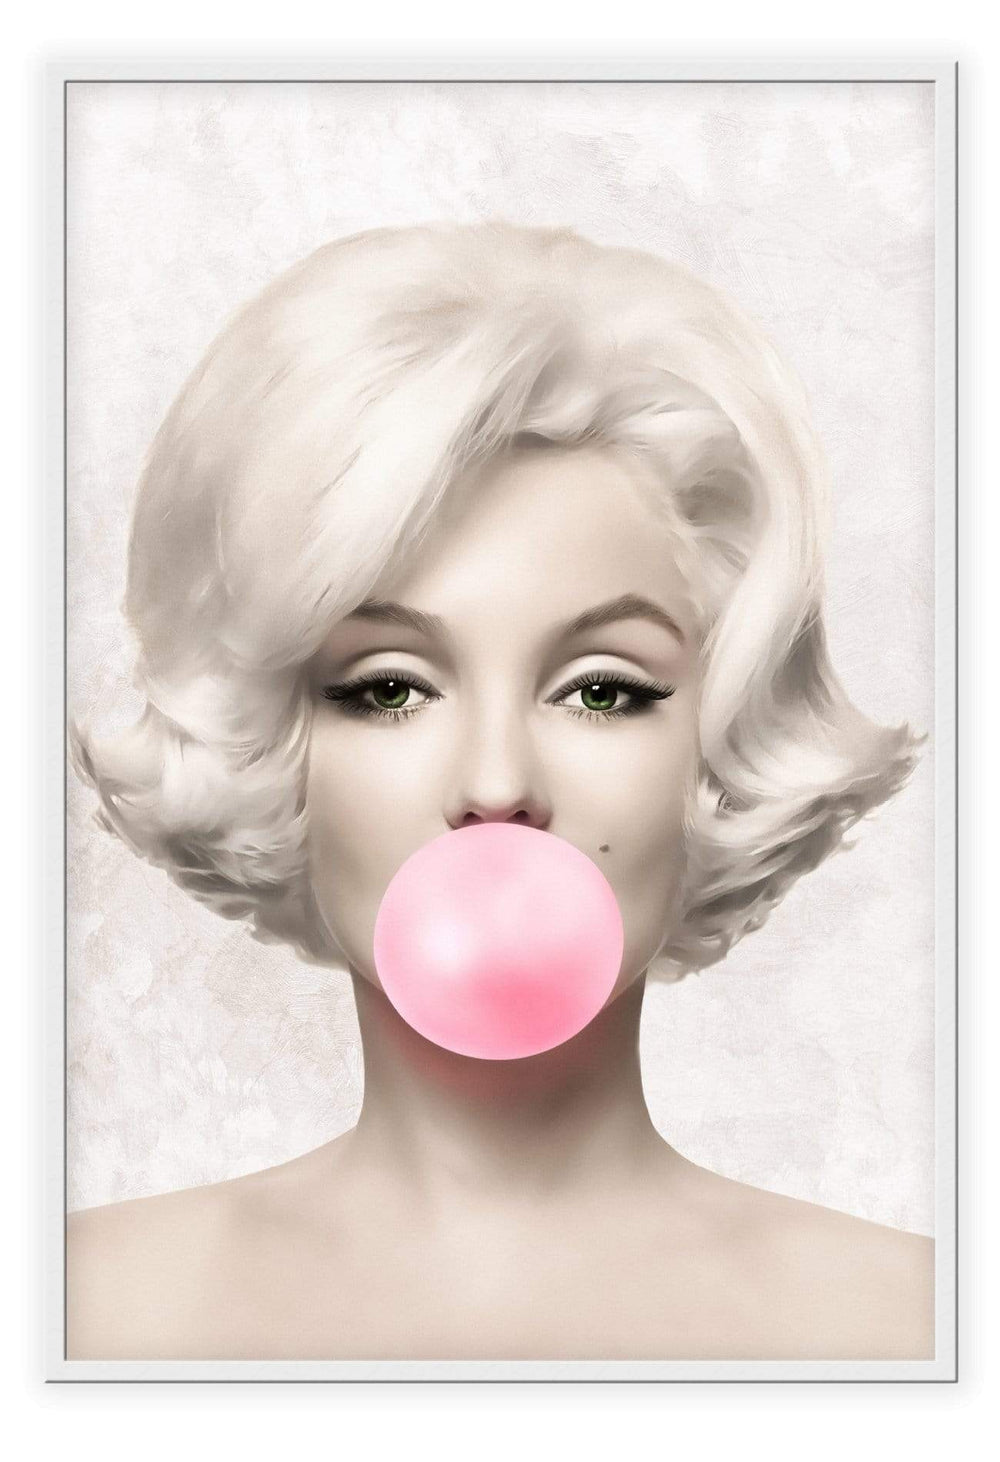 Canvas Print Small		50x70cm / White Marilyn bubble Marilyn bubble Wall Art : Ready to hang framed artwork. Brand